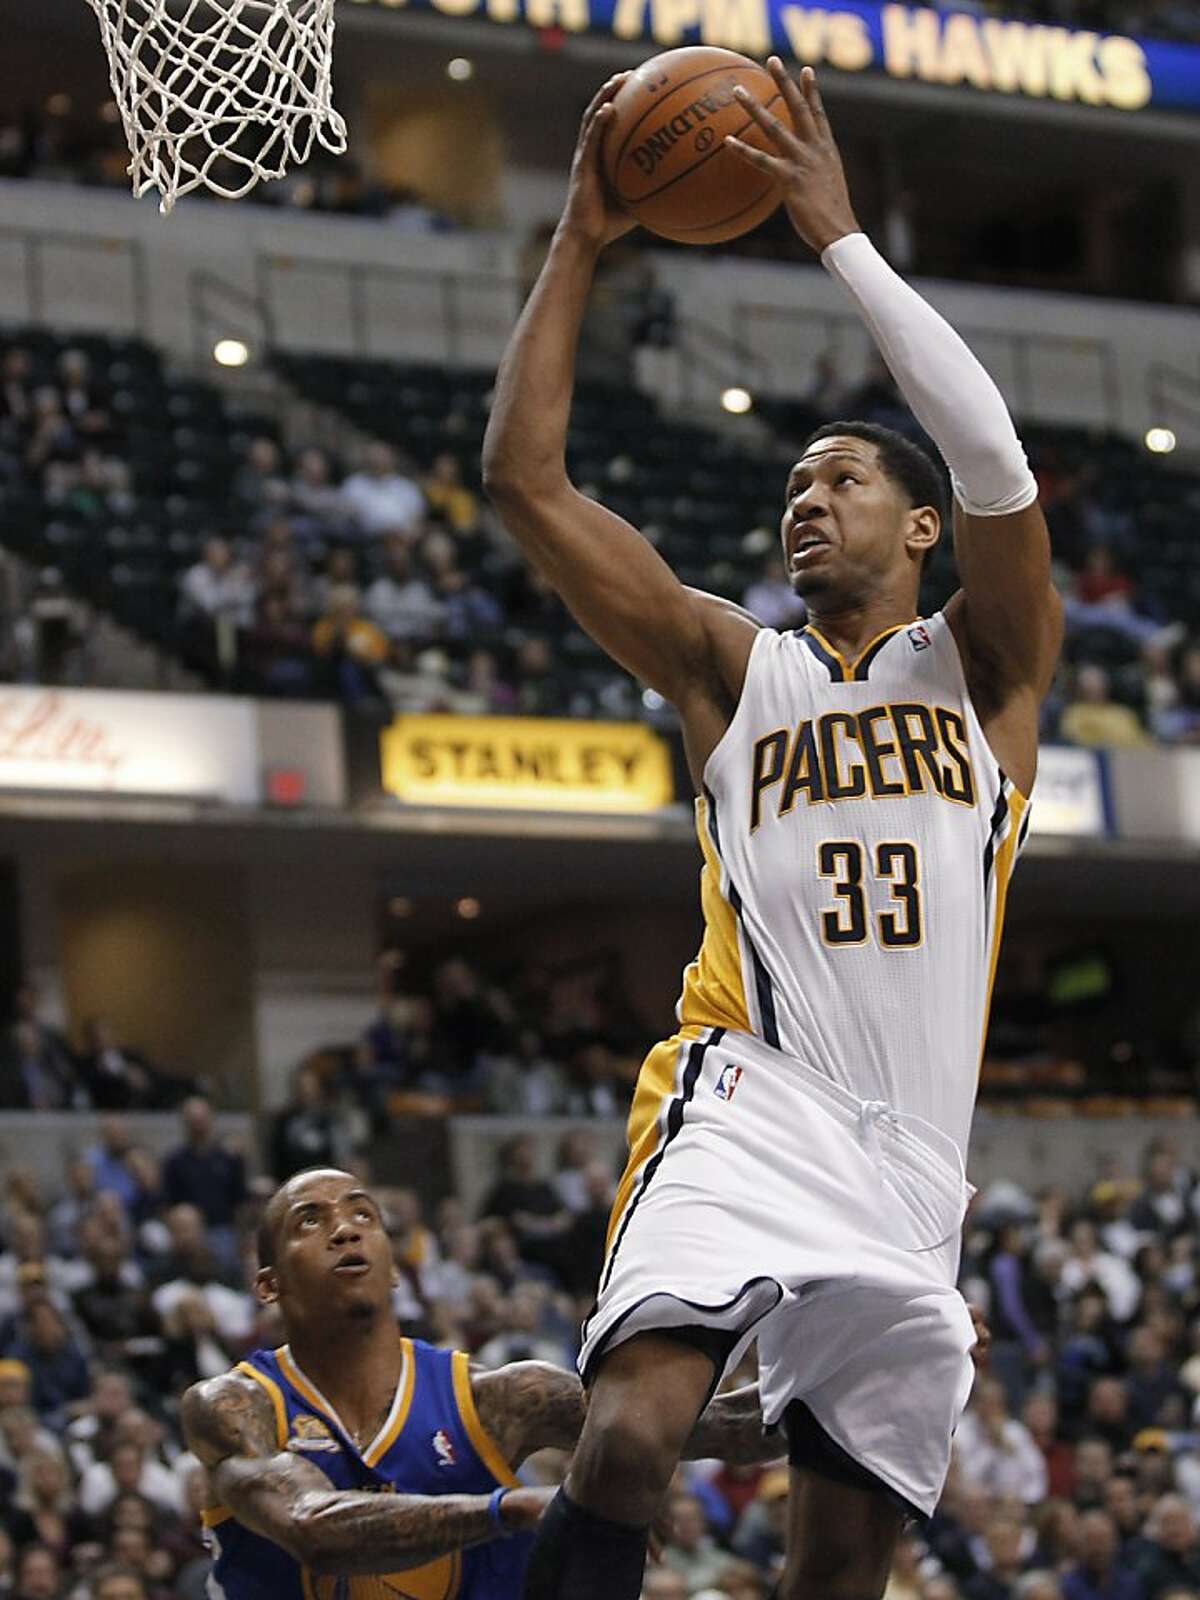 Indiana Pacers forward Danny Granger (33) goes to the basket over Golden State Warriors' Monta Ellis, left, during the third quarter of an NBA basketball game in Indianapolis on Tuesday, Feb. 28, 2012. Granger scored 25 points in the Pacers' 102-78 win. (AP Photo/Dave Martin)